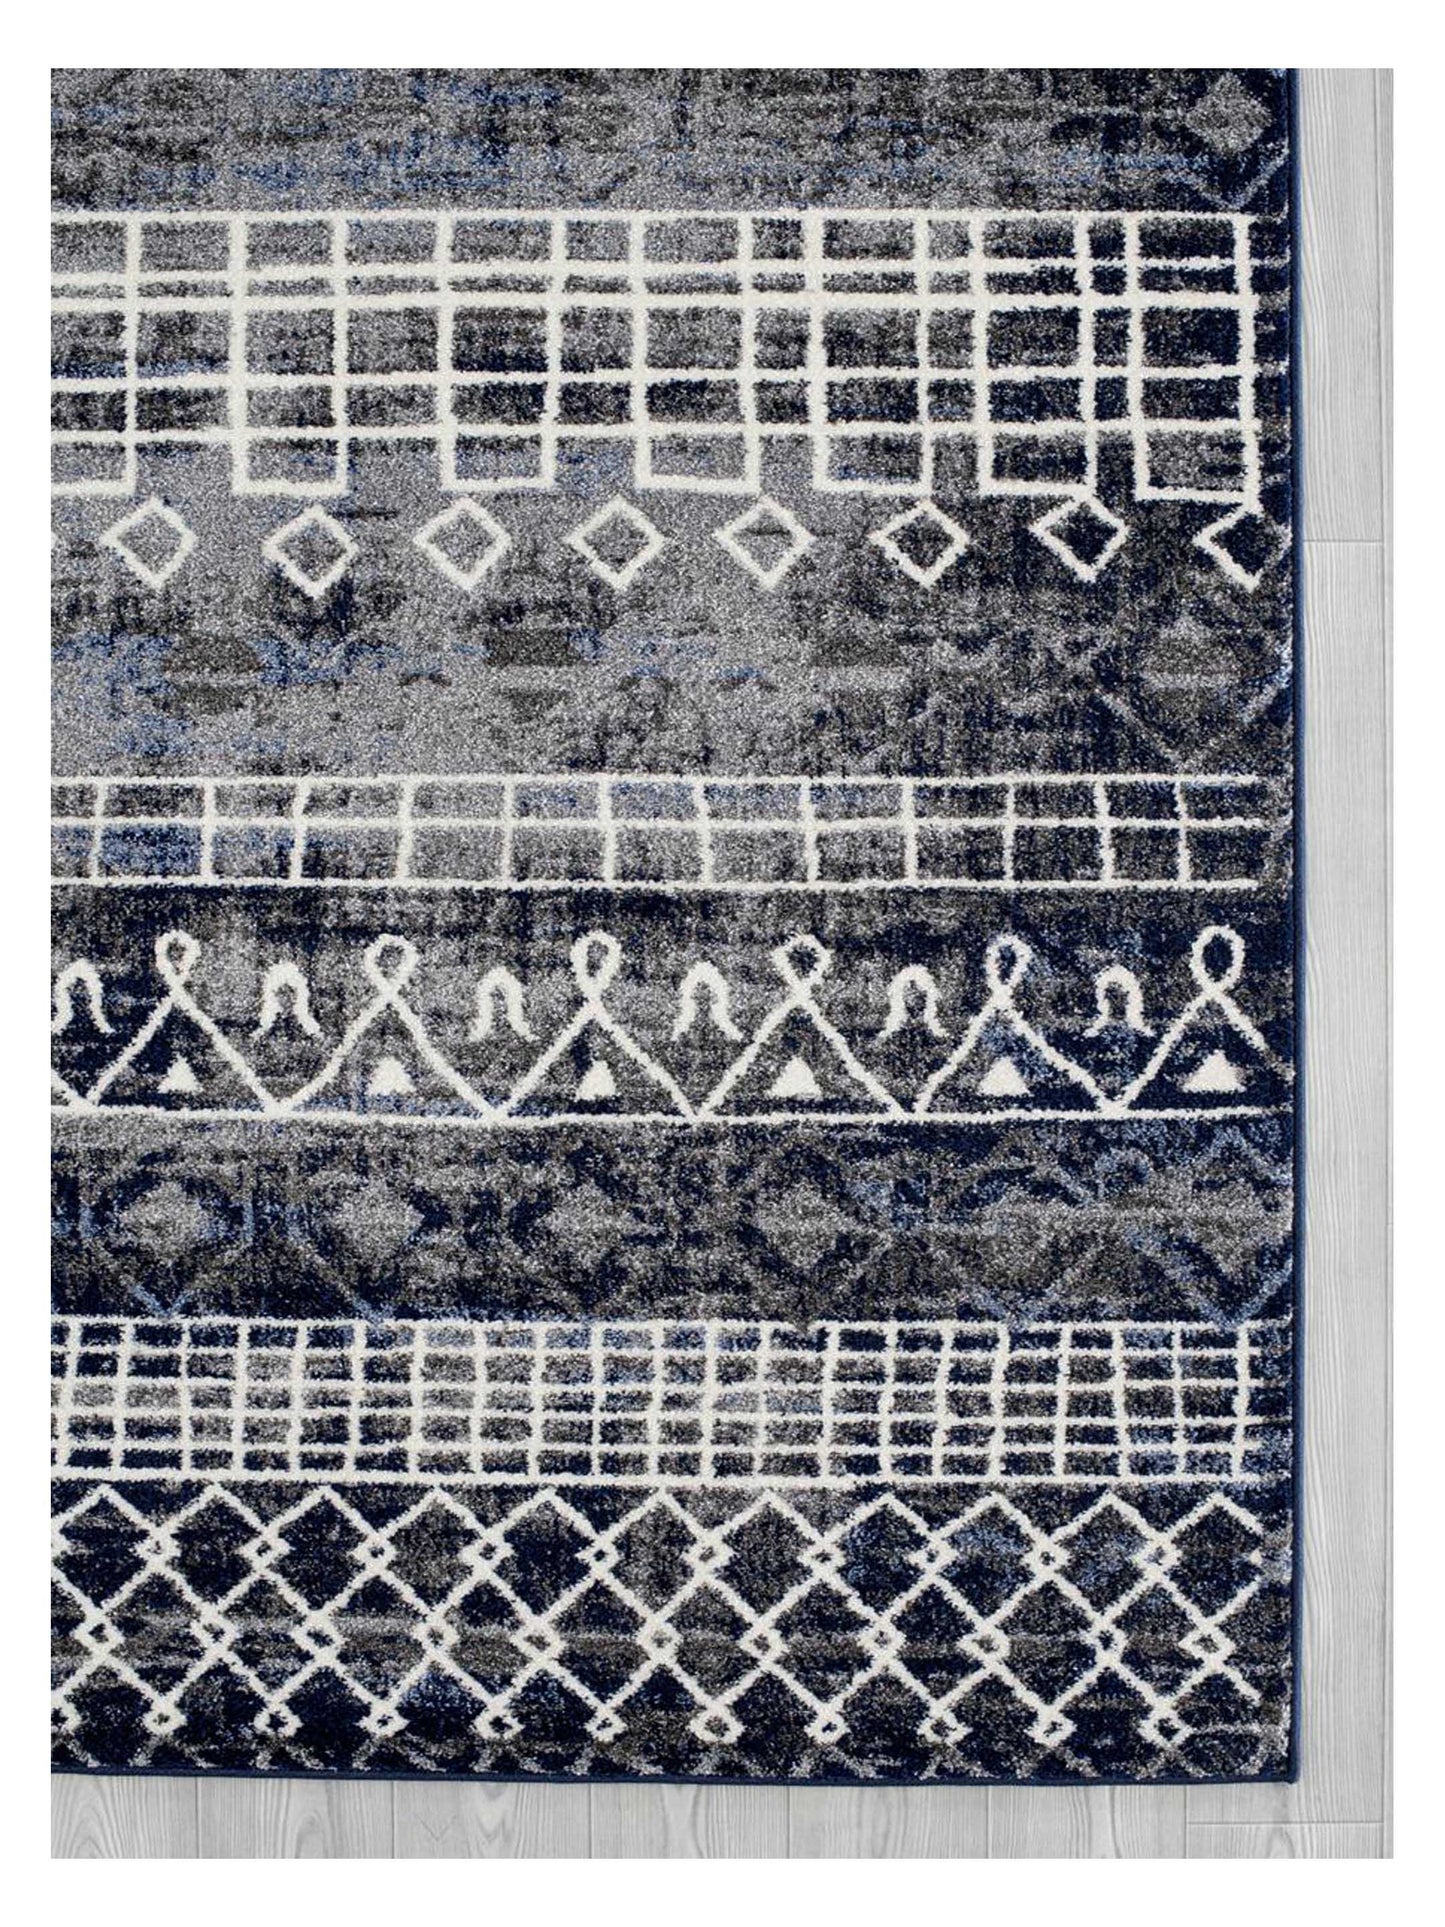 Limited Selena SD-602 Charcoal Ivory  Transitional Machinemade Rug